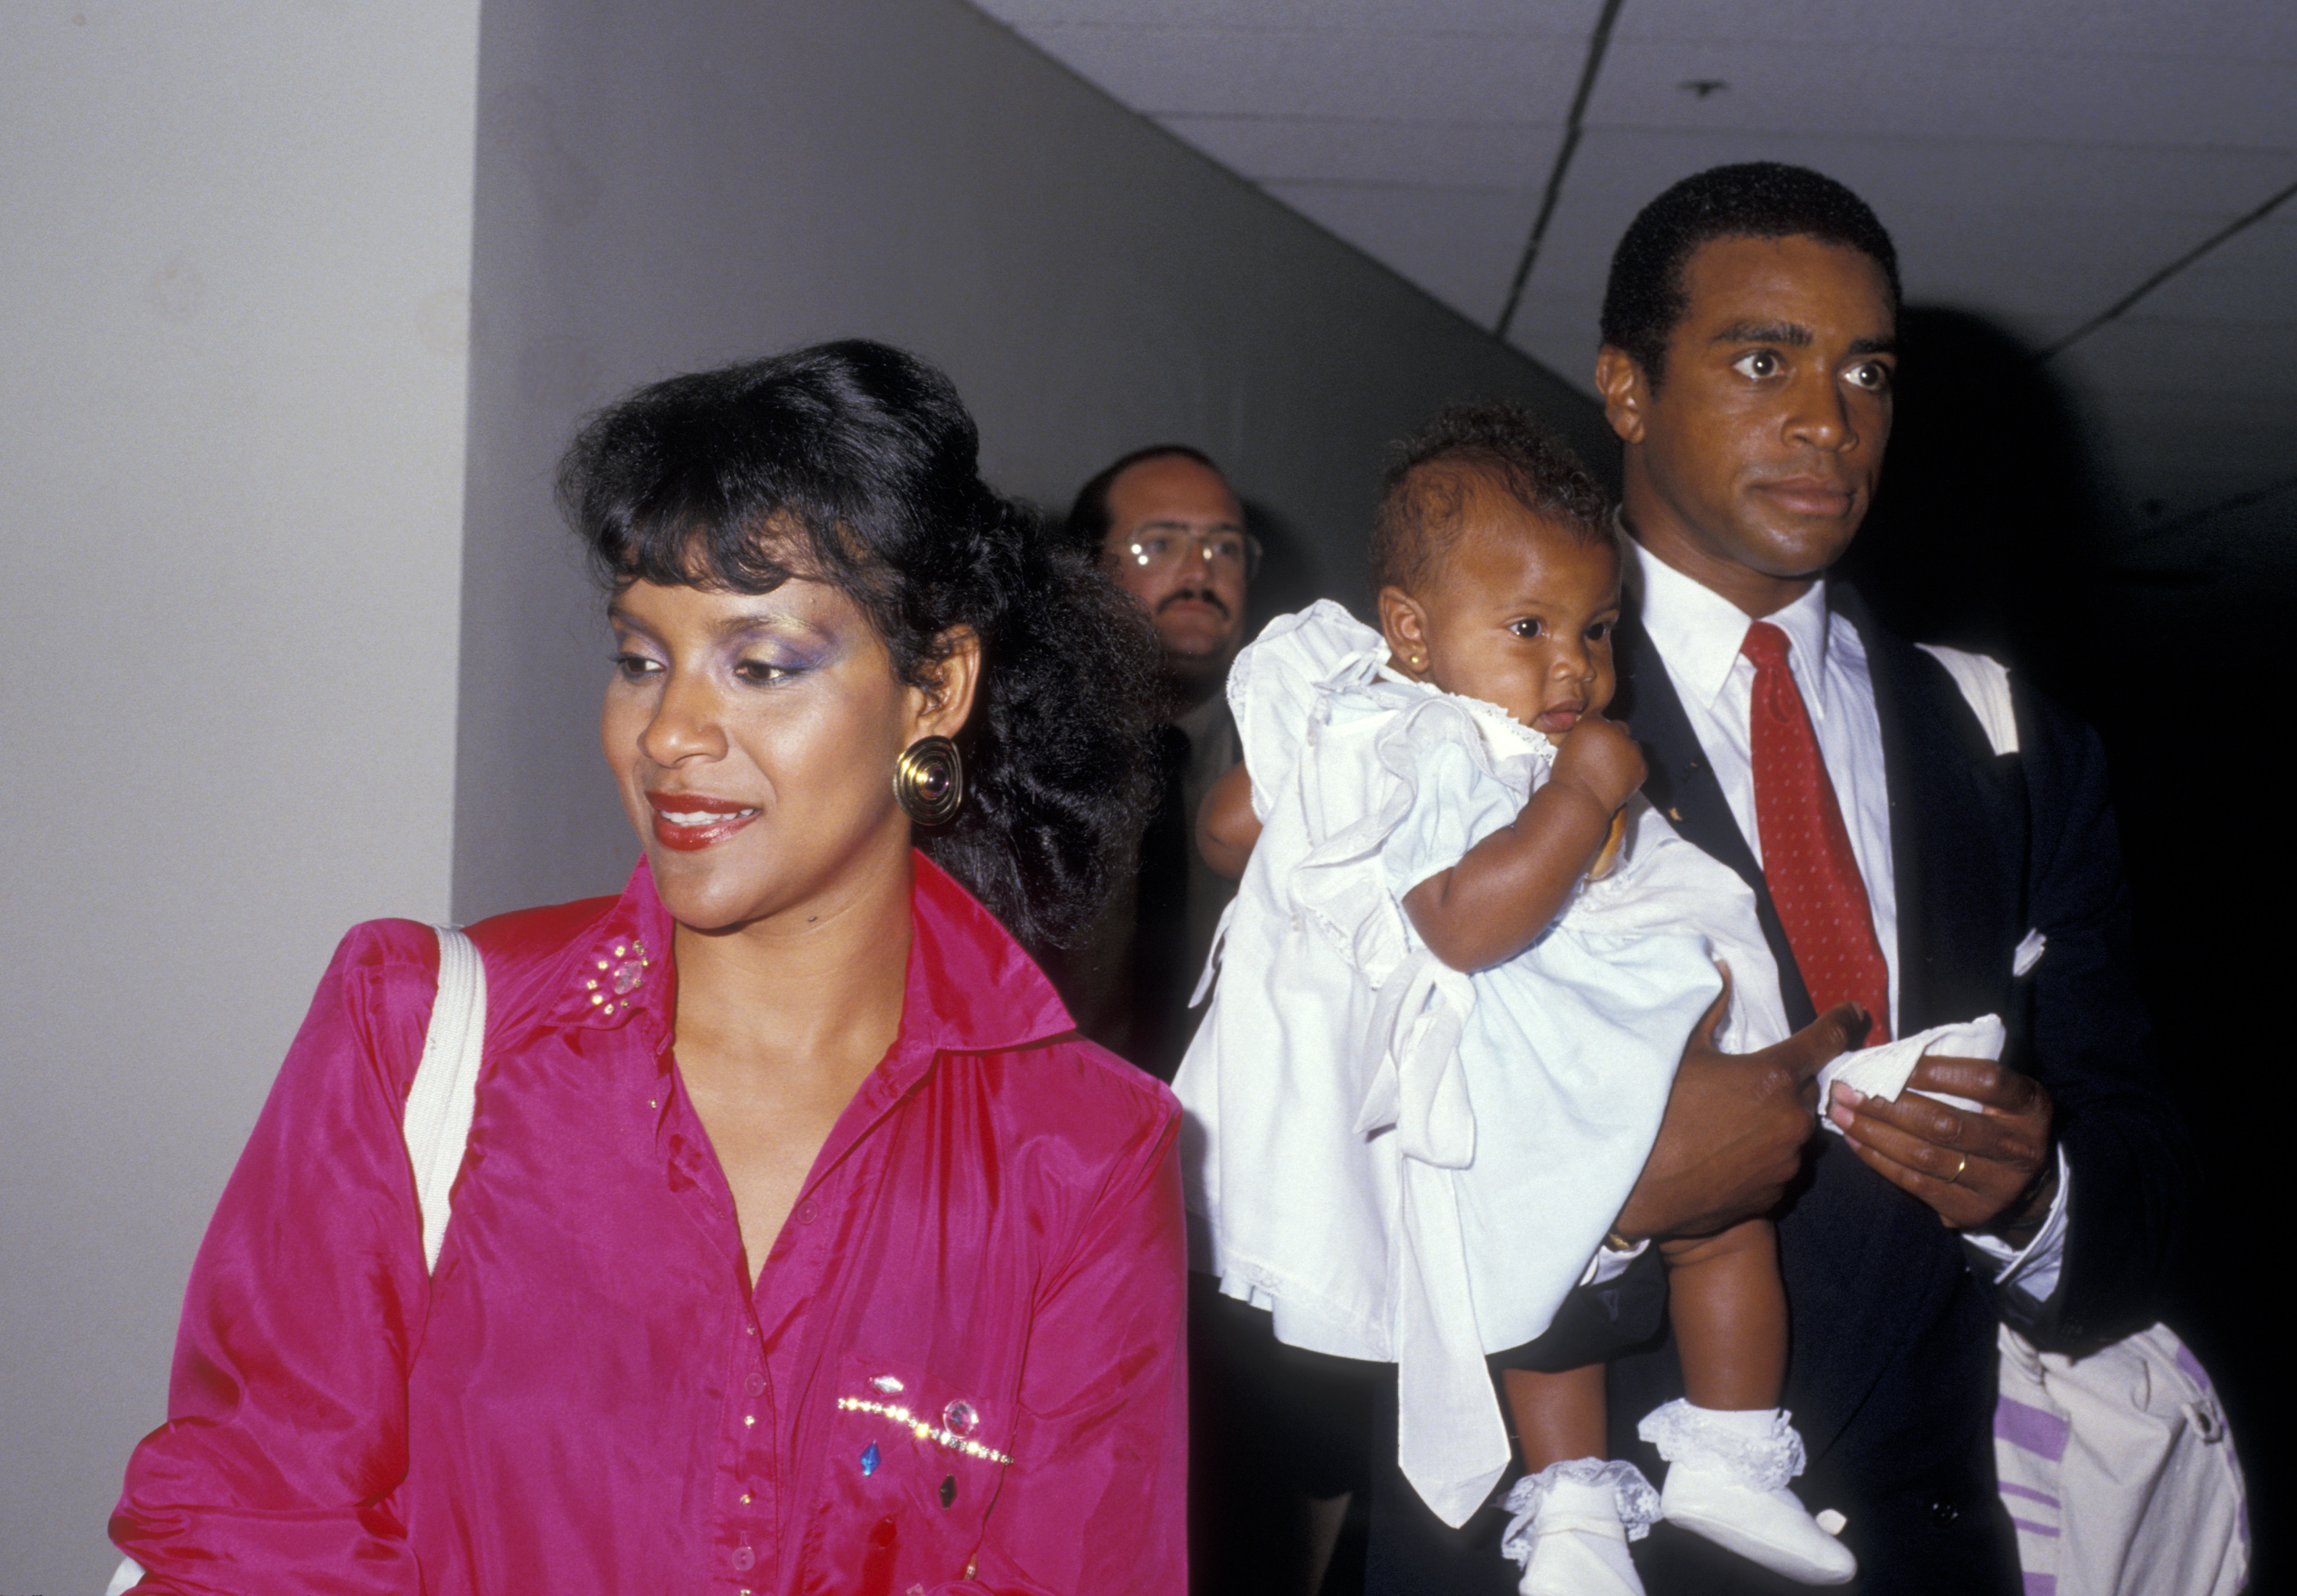 Phylicia Rashad, Ahmad Rashad, and their daughter Condola Rashad attend the "NBC Affiliates Party" on June 2, 1987, at the Century Plaza Hotel in Century City, California. | Source: Getty Images